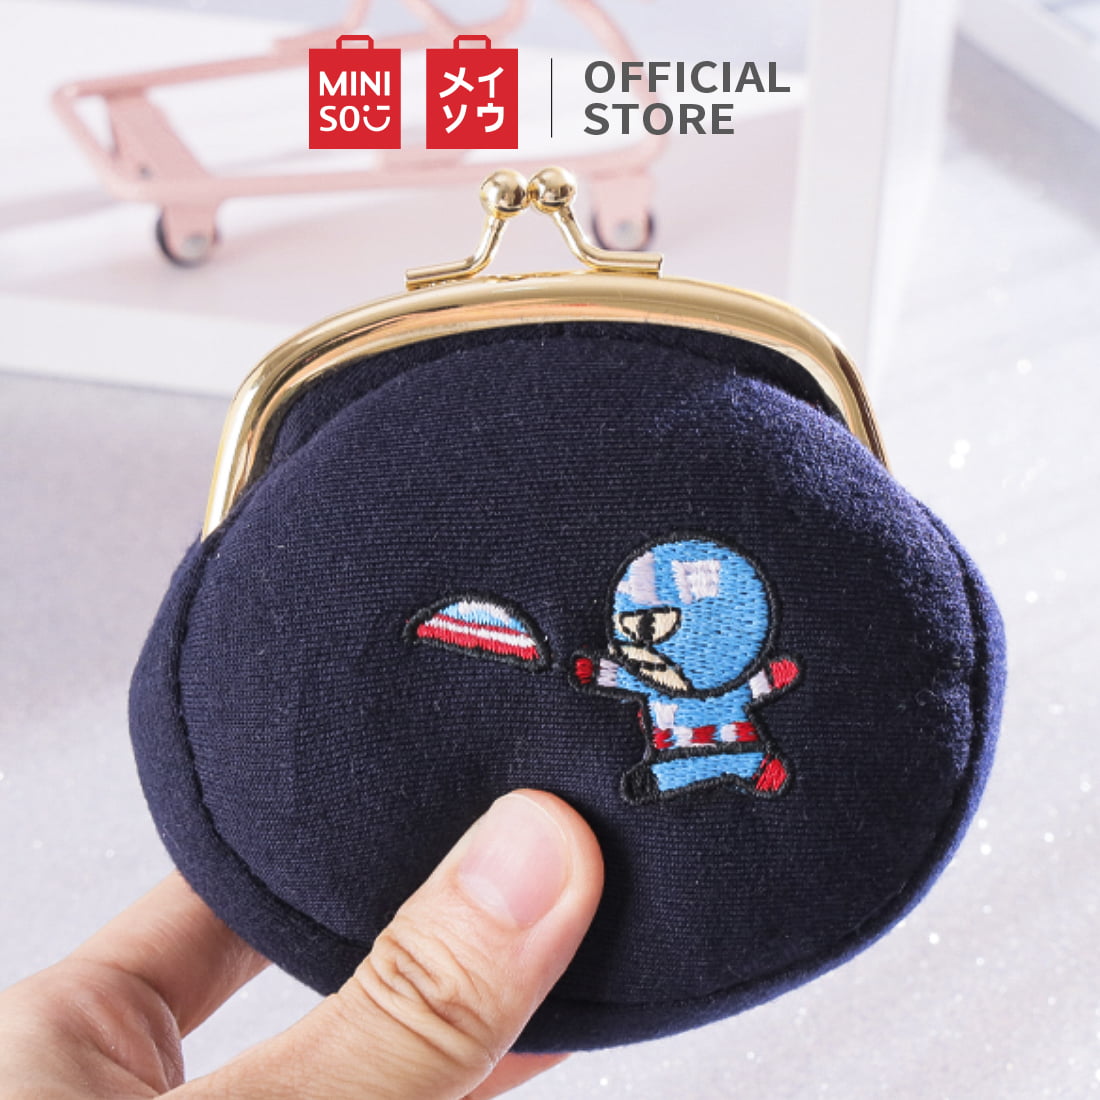 M58009 MINI POCHETTE ACCESSOIRES N58009 Iconic Fashion Womens CANVAS Pouch  Evening Clutch Zippy Chain Wallet Coin Purse Phone Sling Bag From Join2,  $12.19